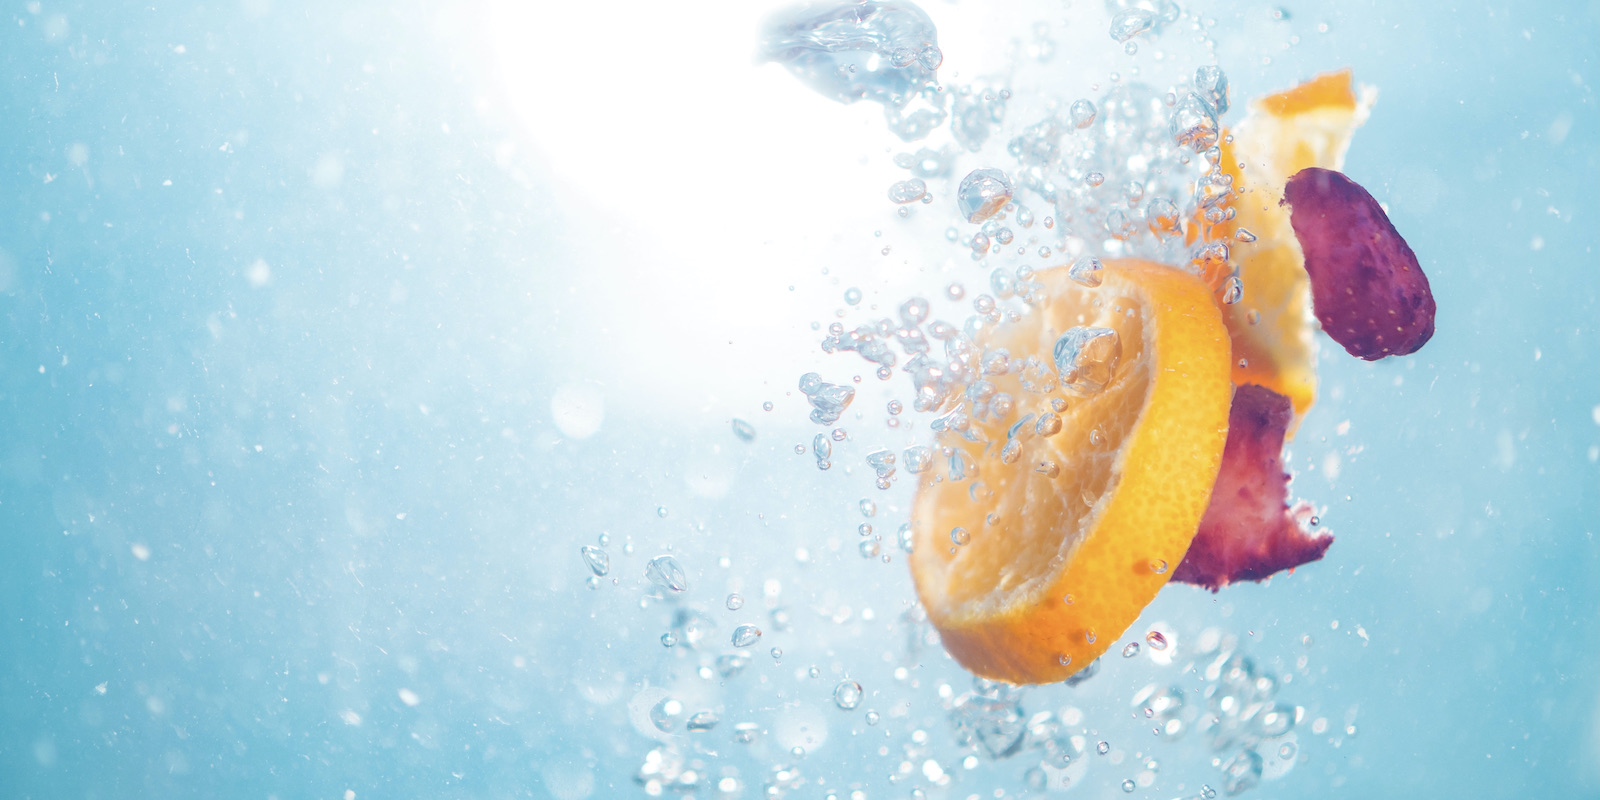 Submerged orange slices, lemon slices and strawberry slices float among air bubbles